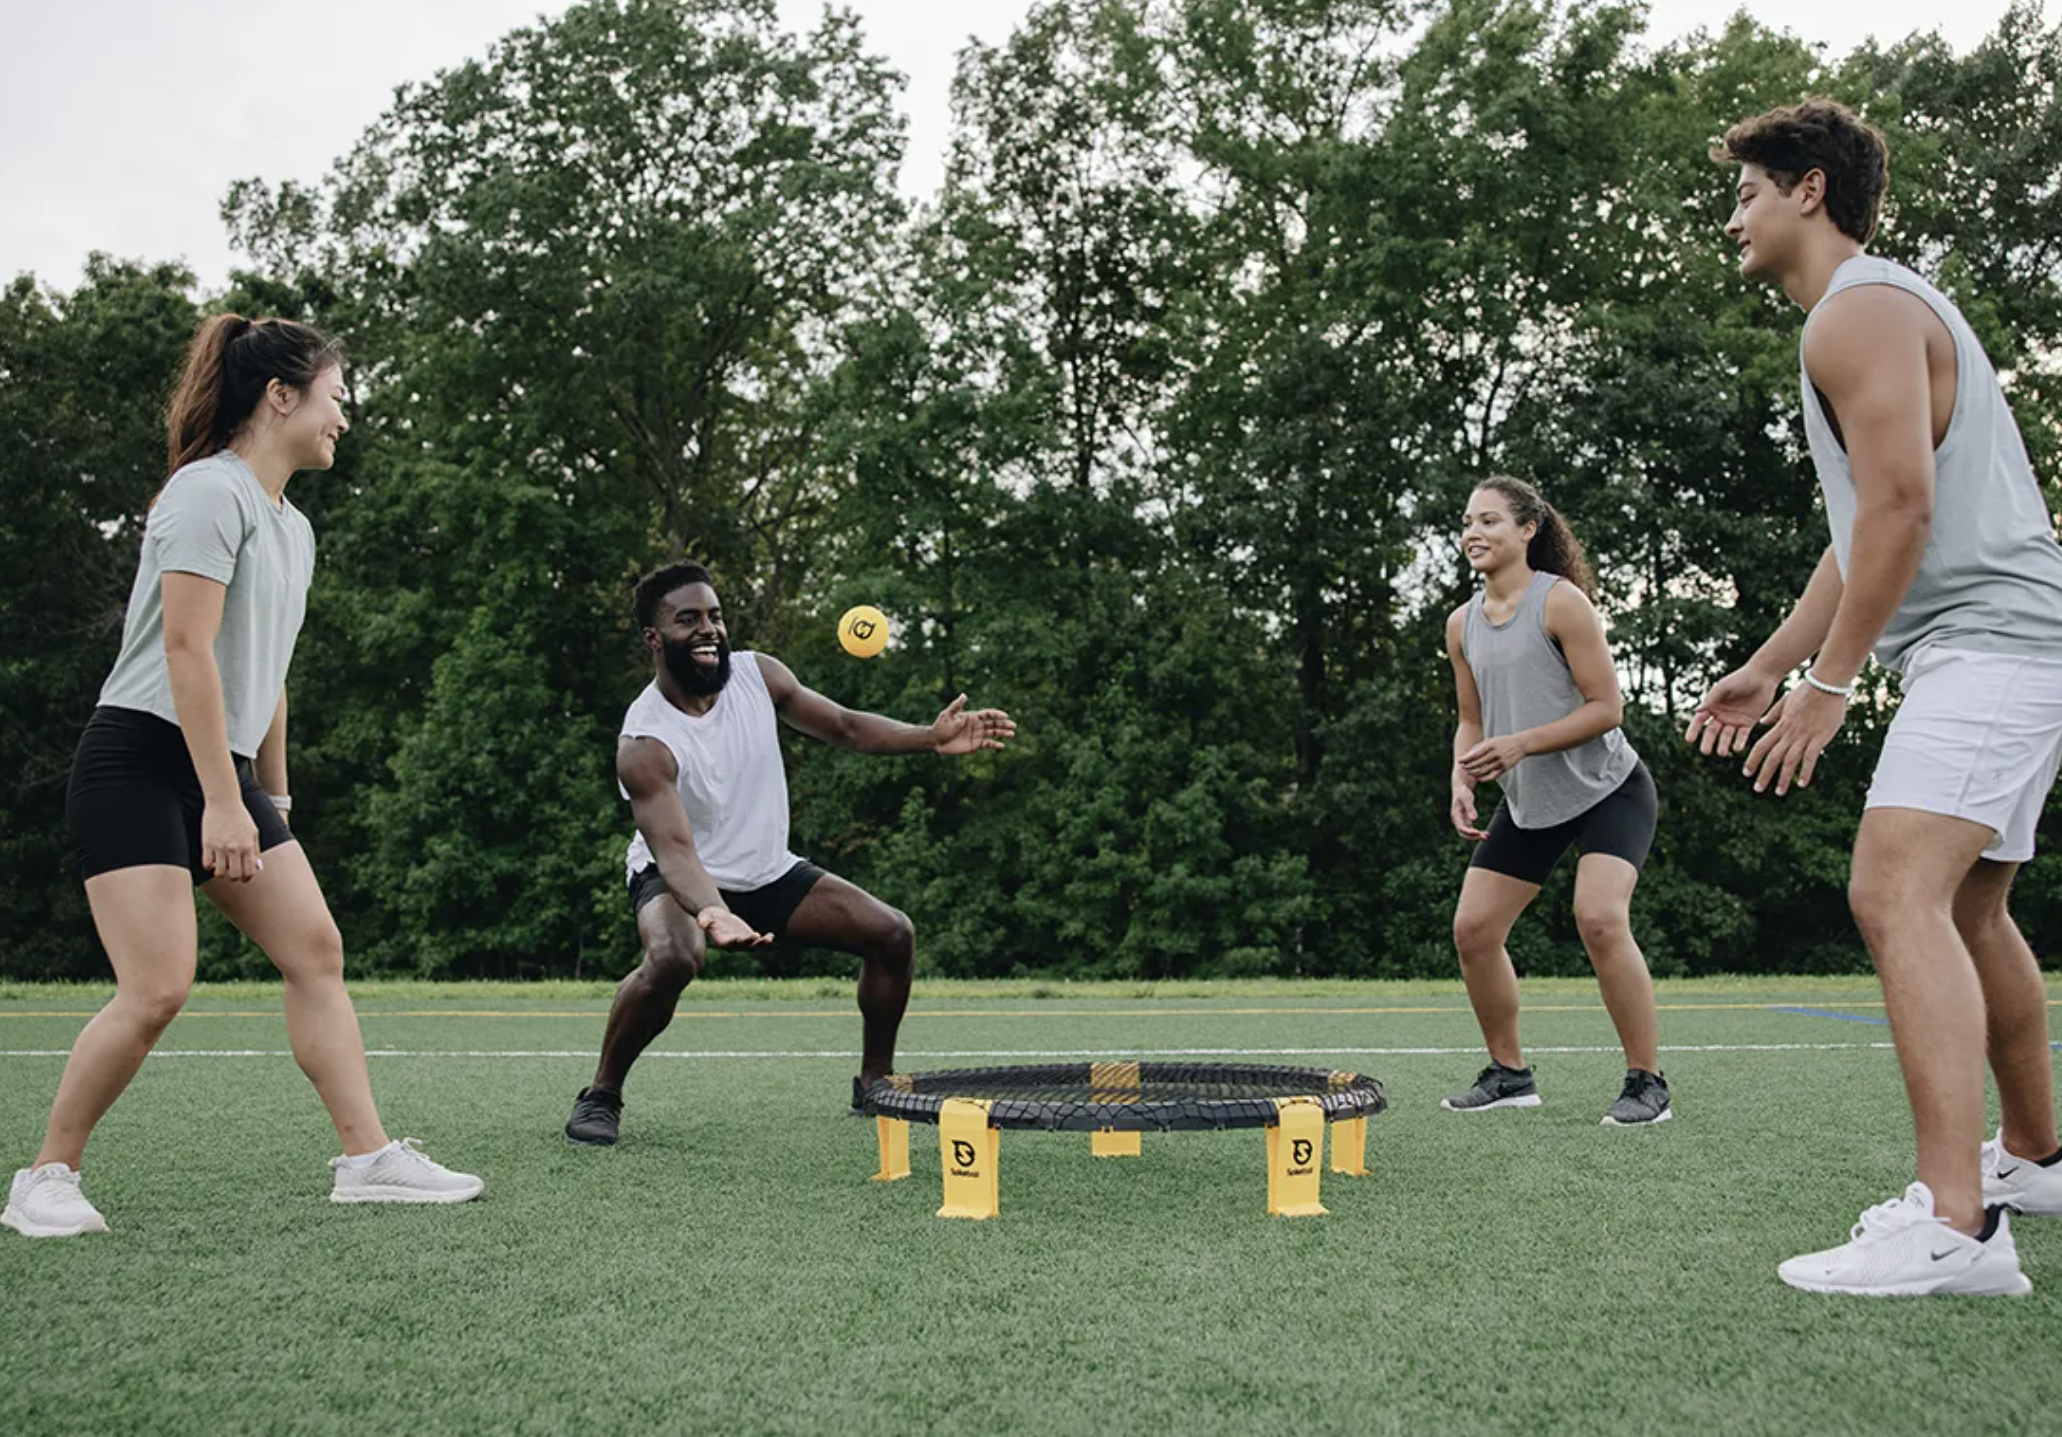 Four people playing Spikeball on a lawn